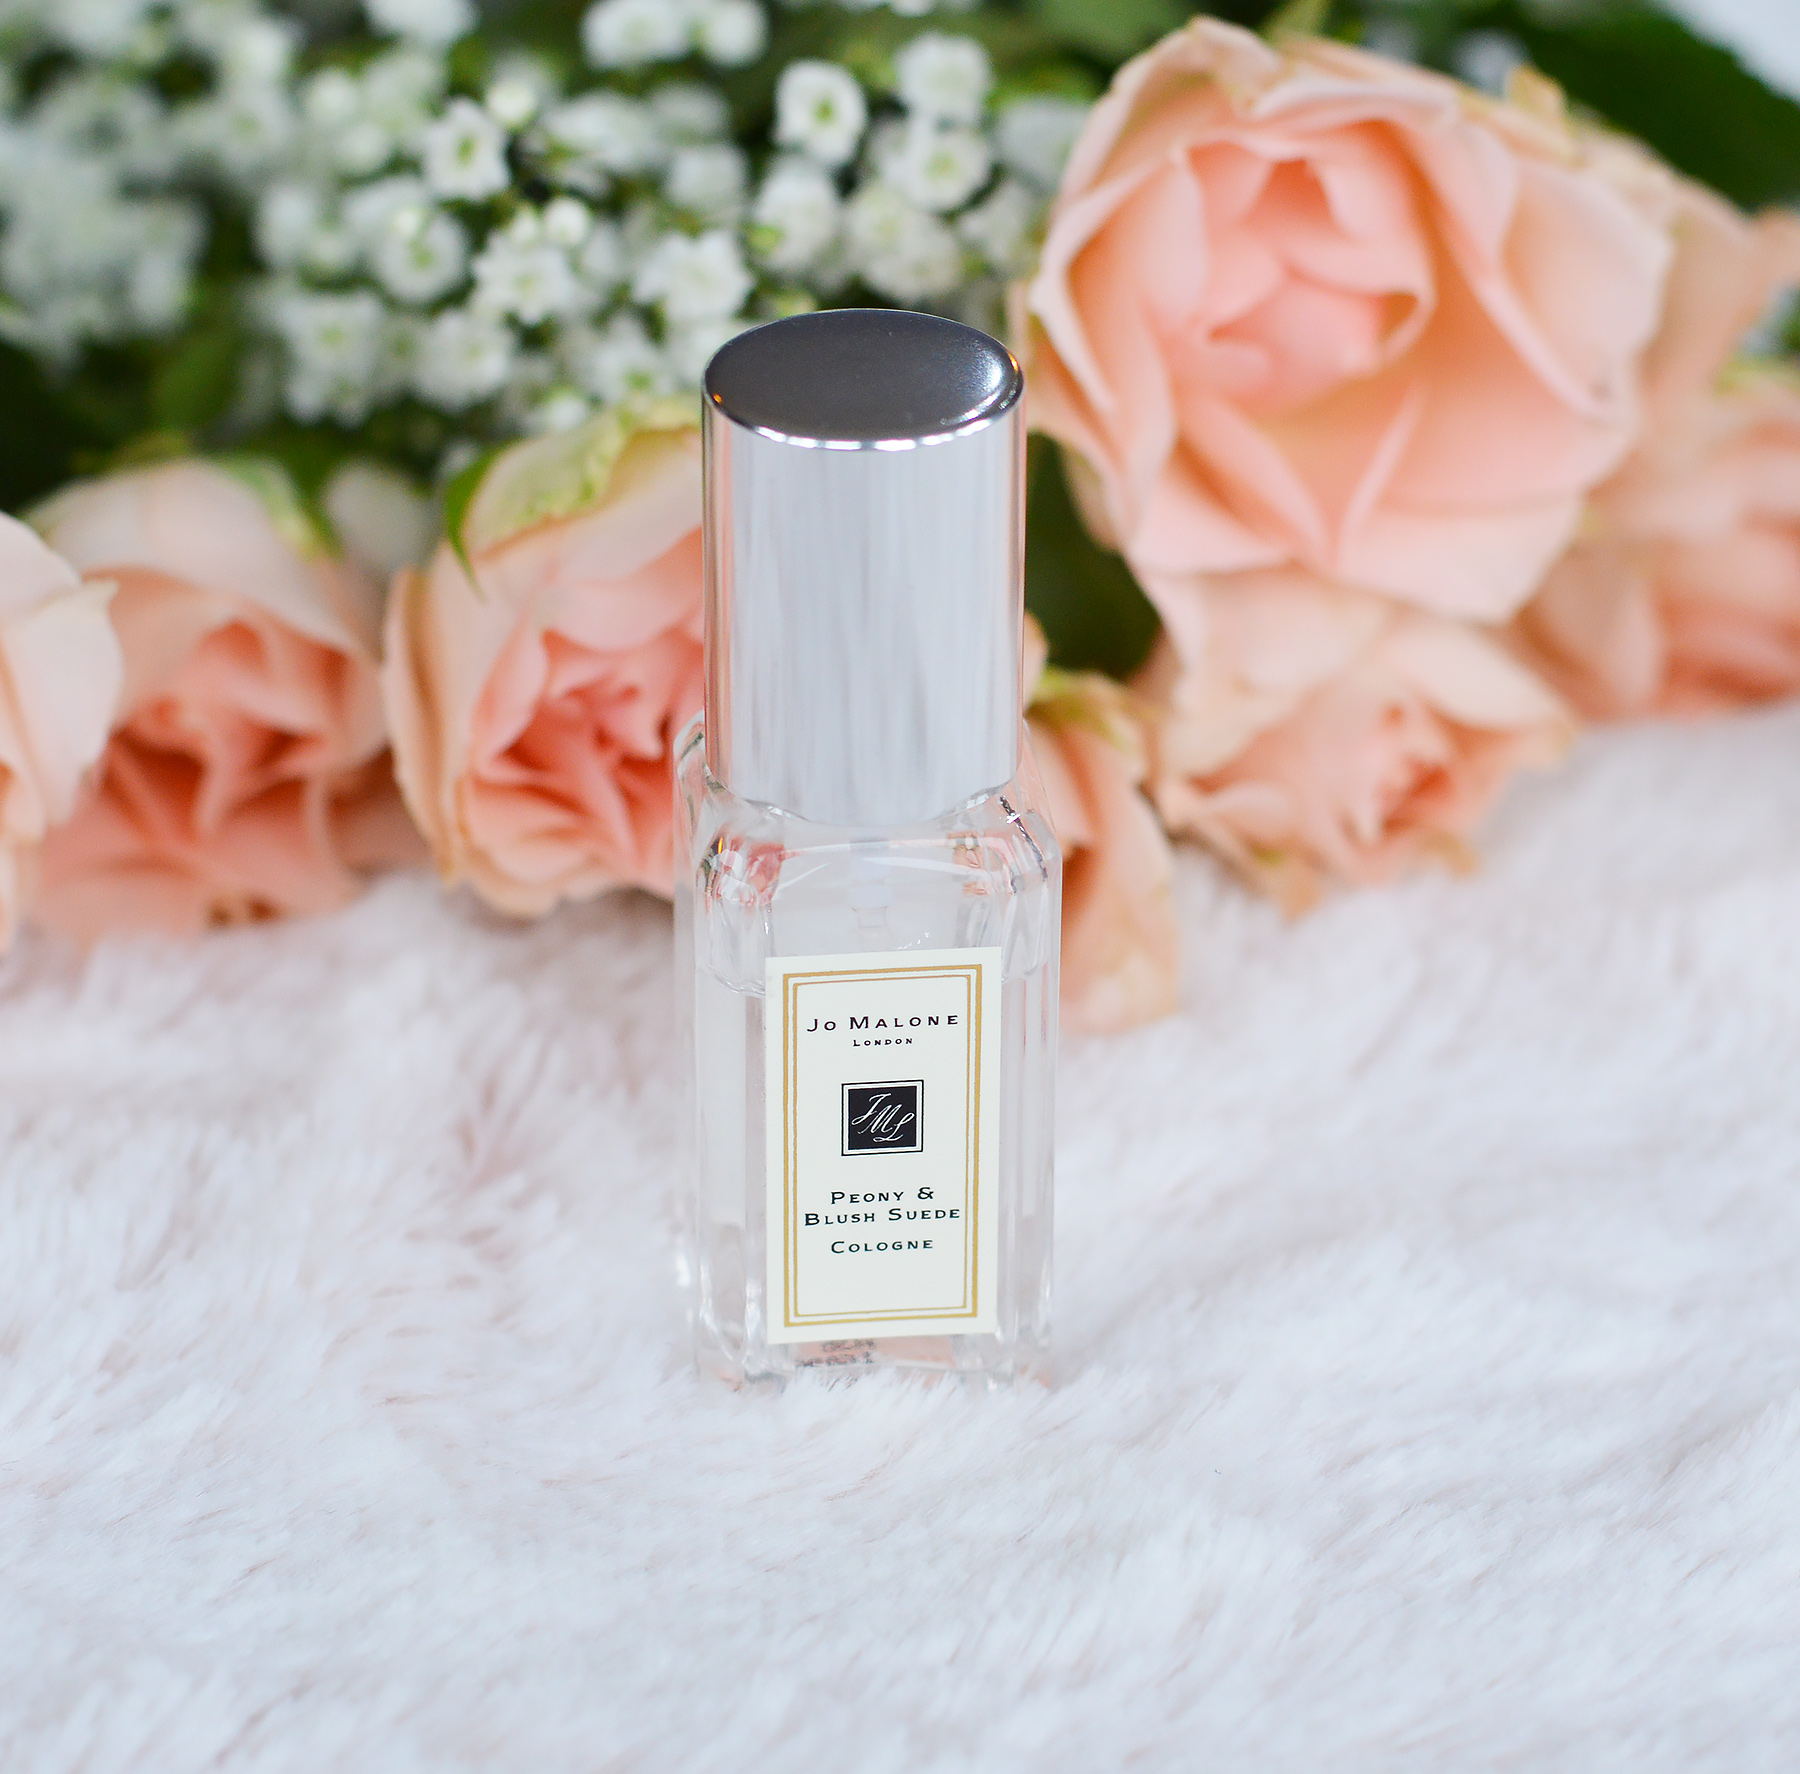 Jo Malone Peony And Blush Suede Cologne Review